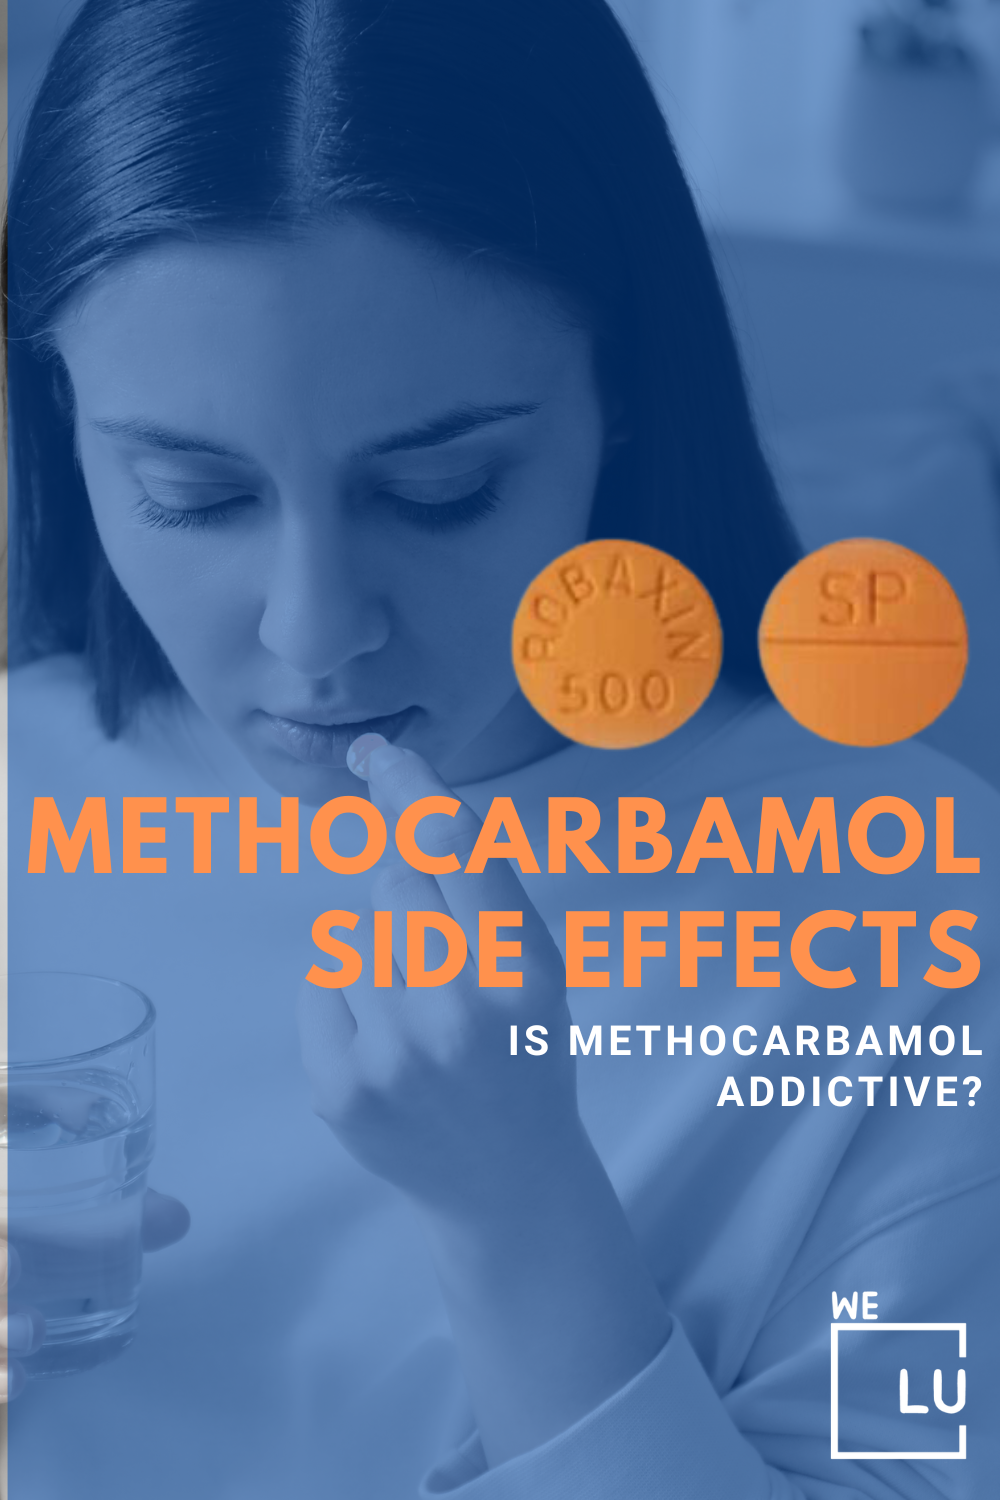 Guide to (Robaxin) Methocarbamol Side Effects. (Robaxin) Methocarbamol 500mg Side Effects vs (Robaxin) Methocarbamol 750 mg Side Effects. (Robaxin).